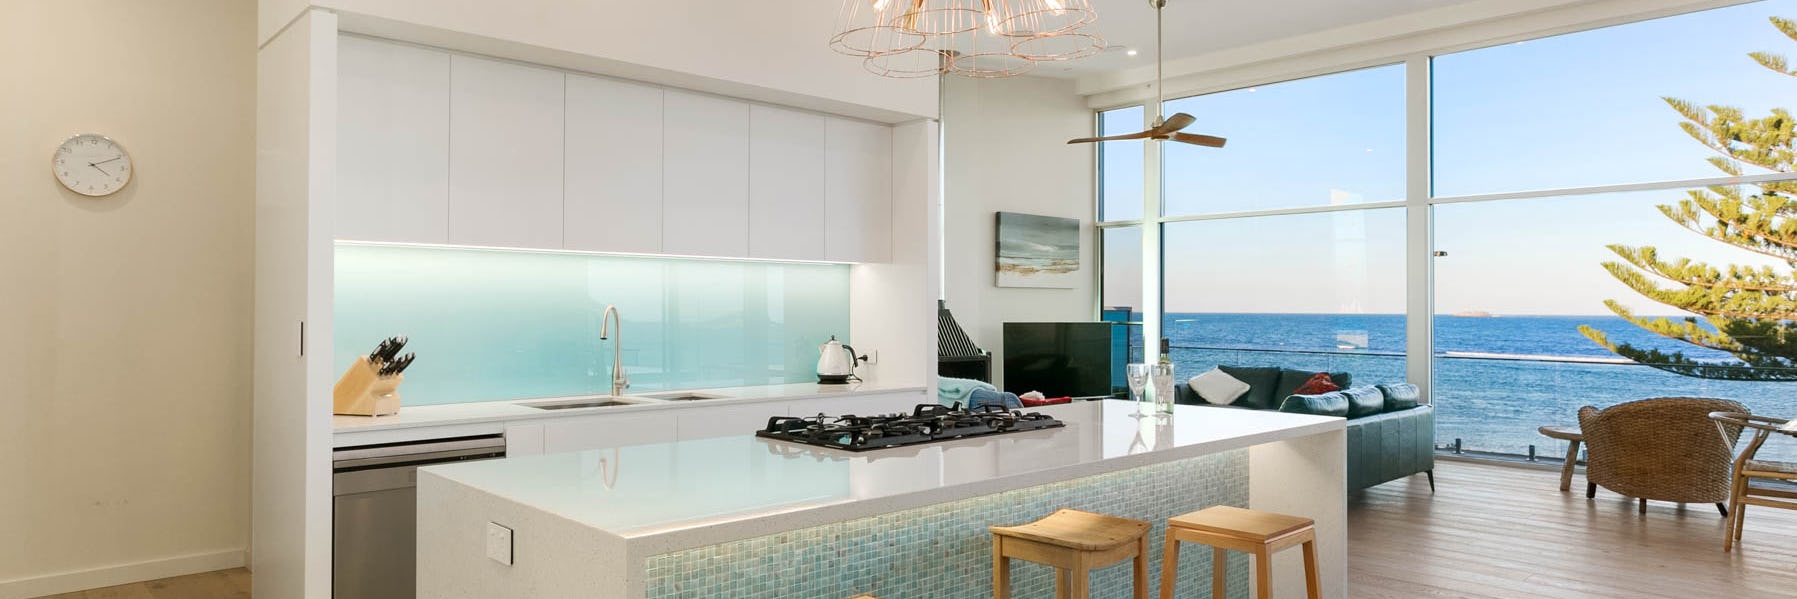 White cabinets with a motarised glass splashback. In front is a white island with integrated cooker top.